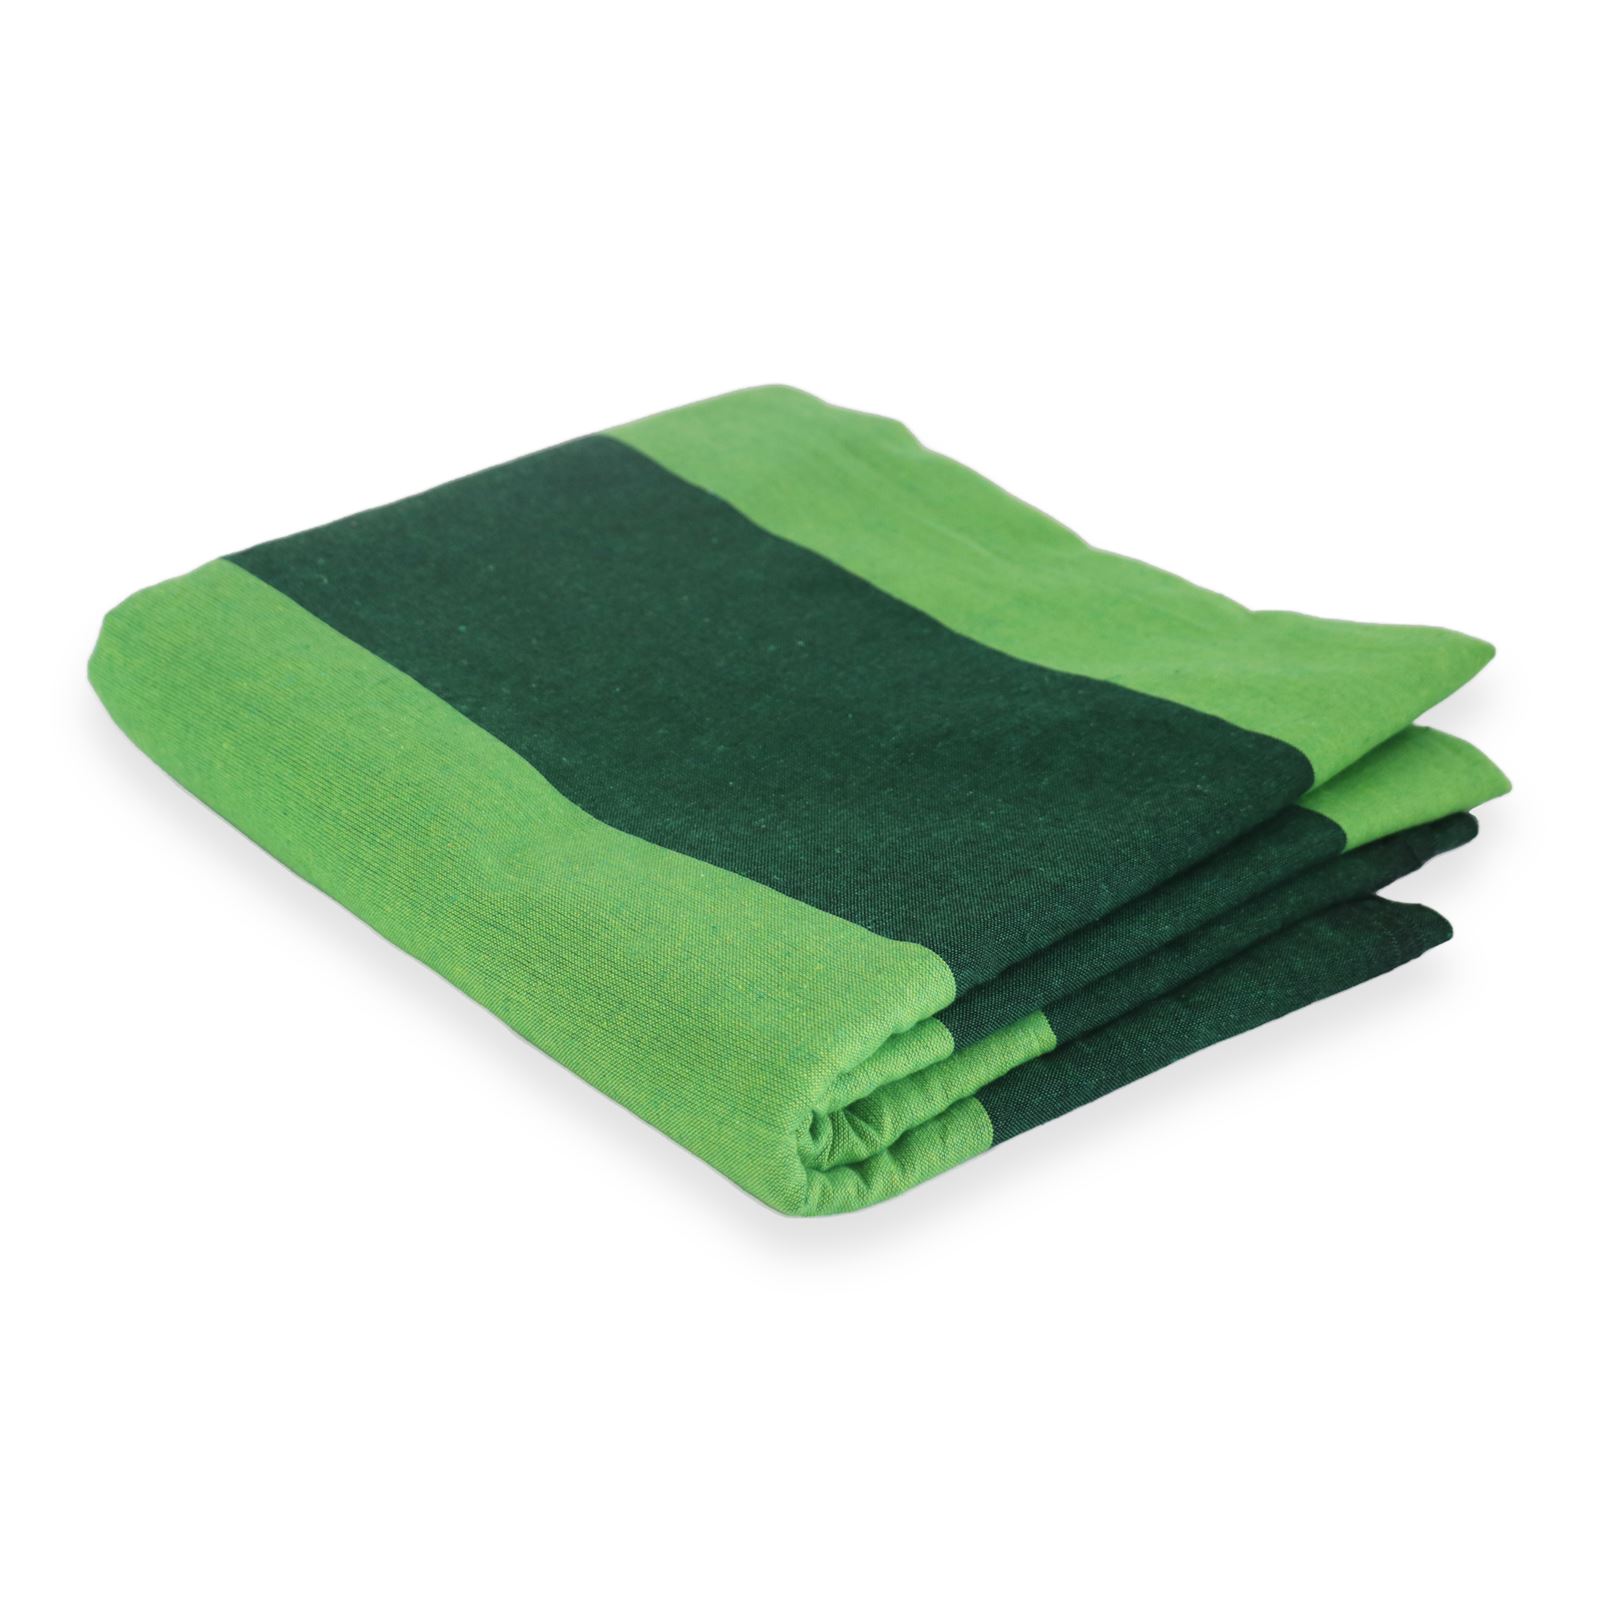 100 x 110 Green Handloom Cotton Bed Sheets for King, Queen, Super King, California King Beds